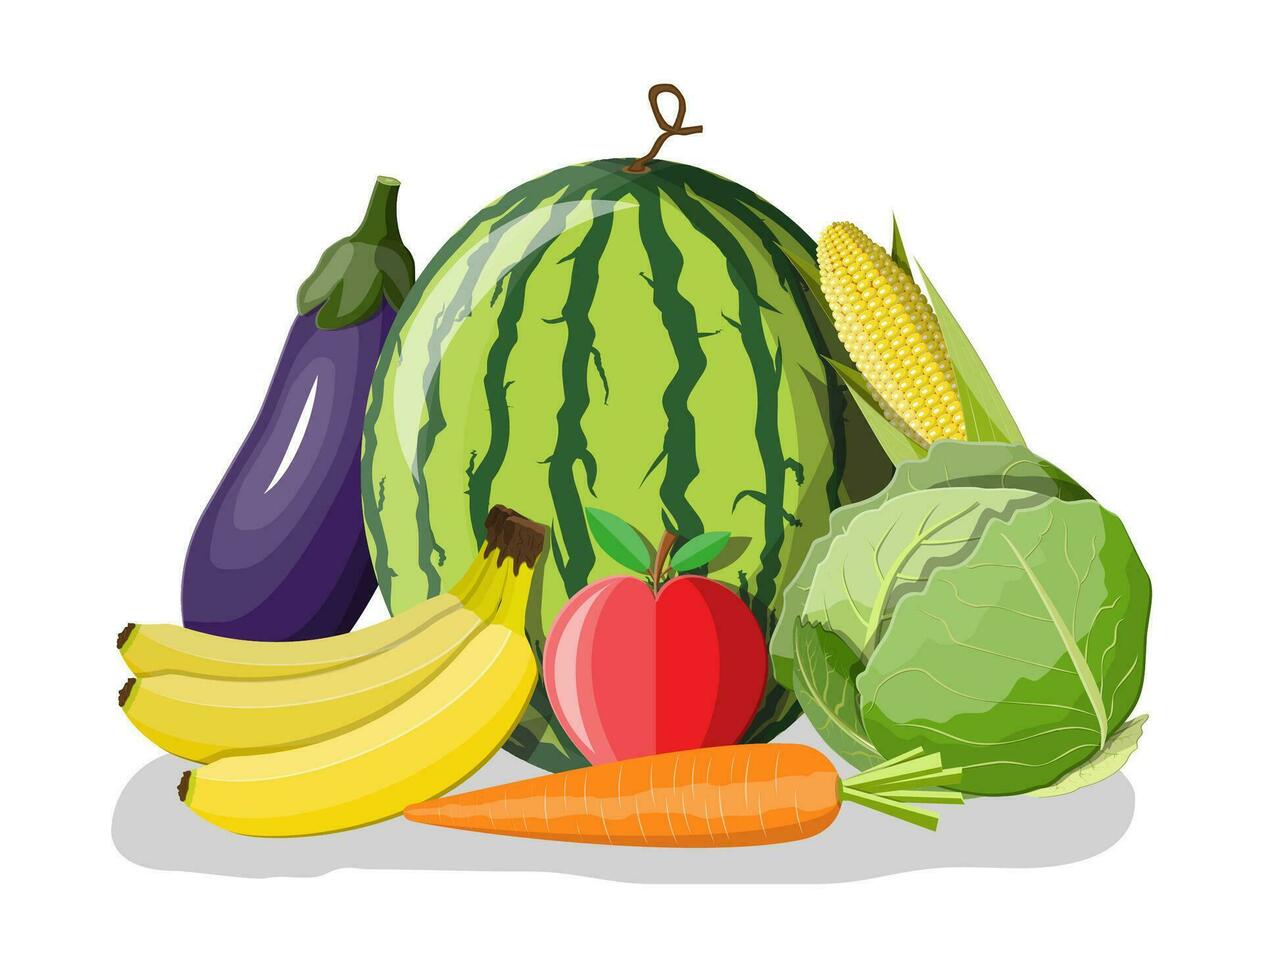 Nature organic products. Diet, nutrition, fitness and weight loss. Vitamins from fruits vegetables. Watermelon, carrot, banana, apple, cabbage corn and eggplant. Veggie food. Flat vector illustration